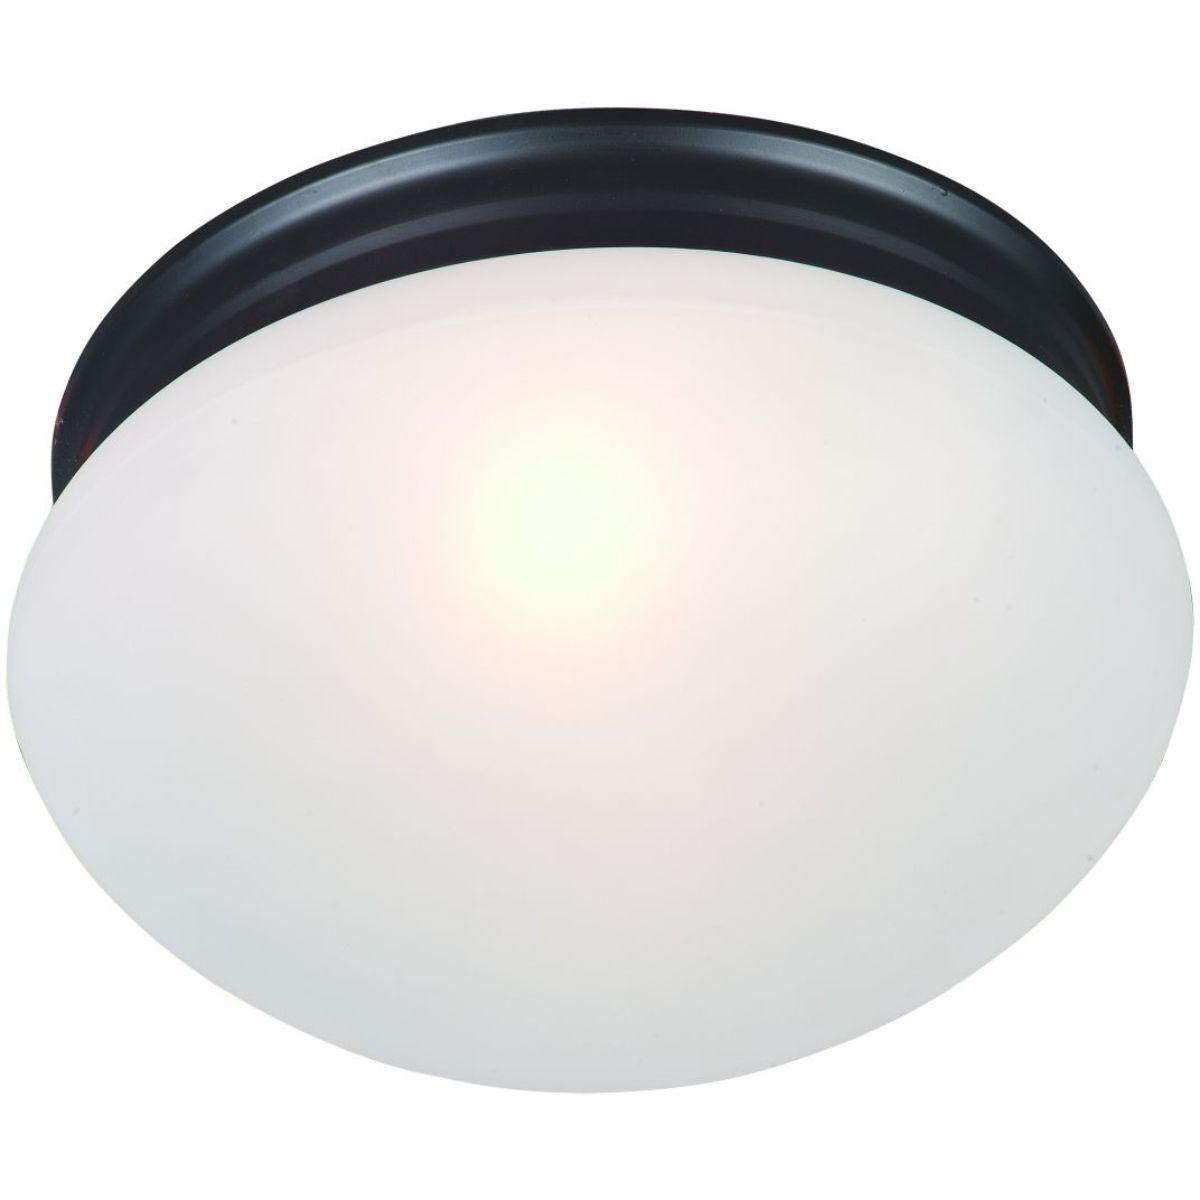 Essentials-588x 9 in. 2 Lights Ceiling Puff Light with frosted glass